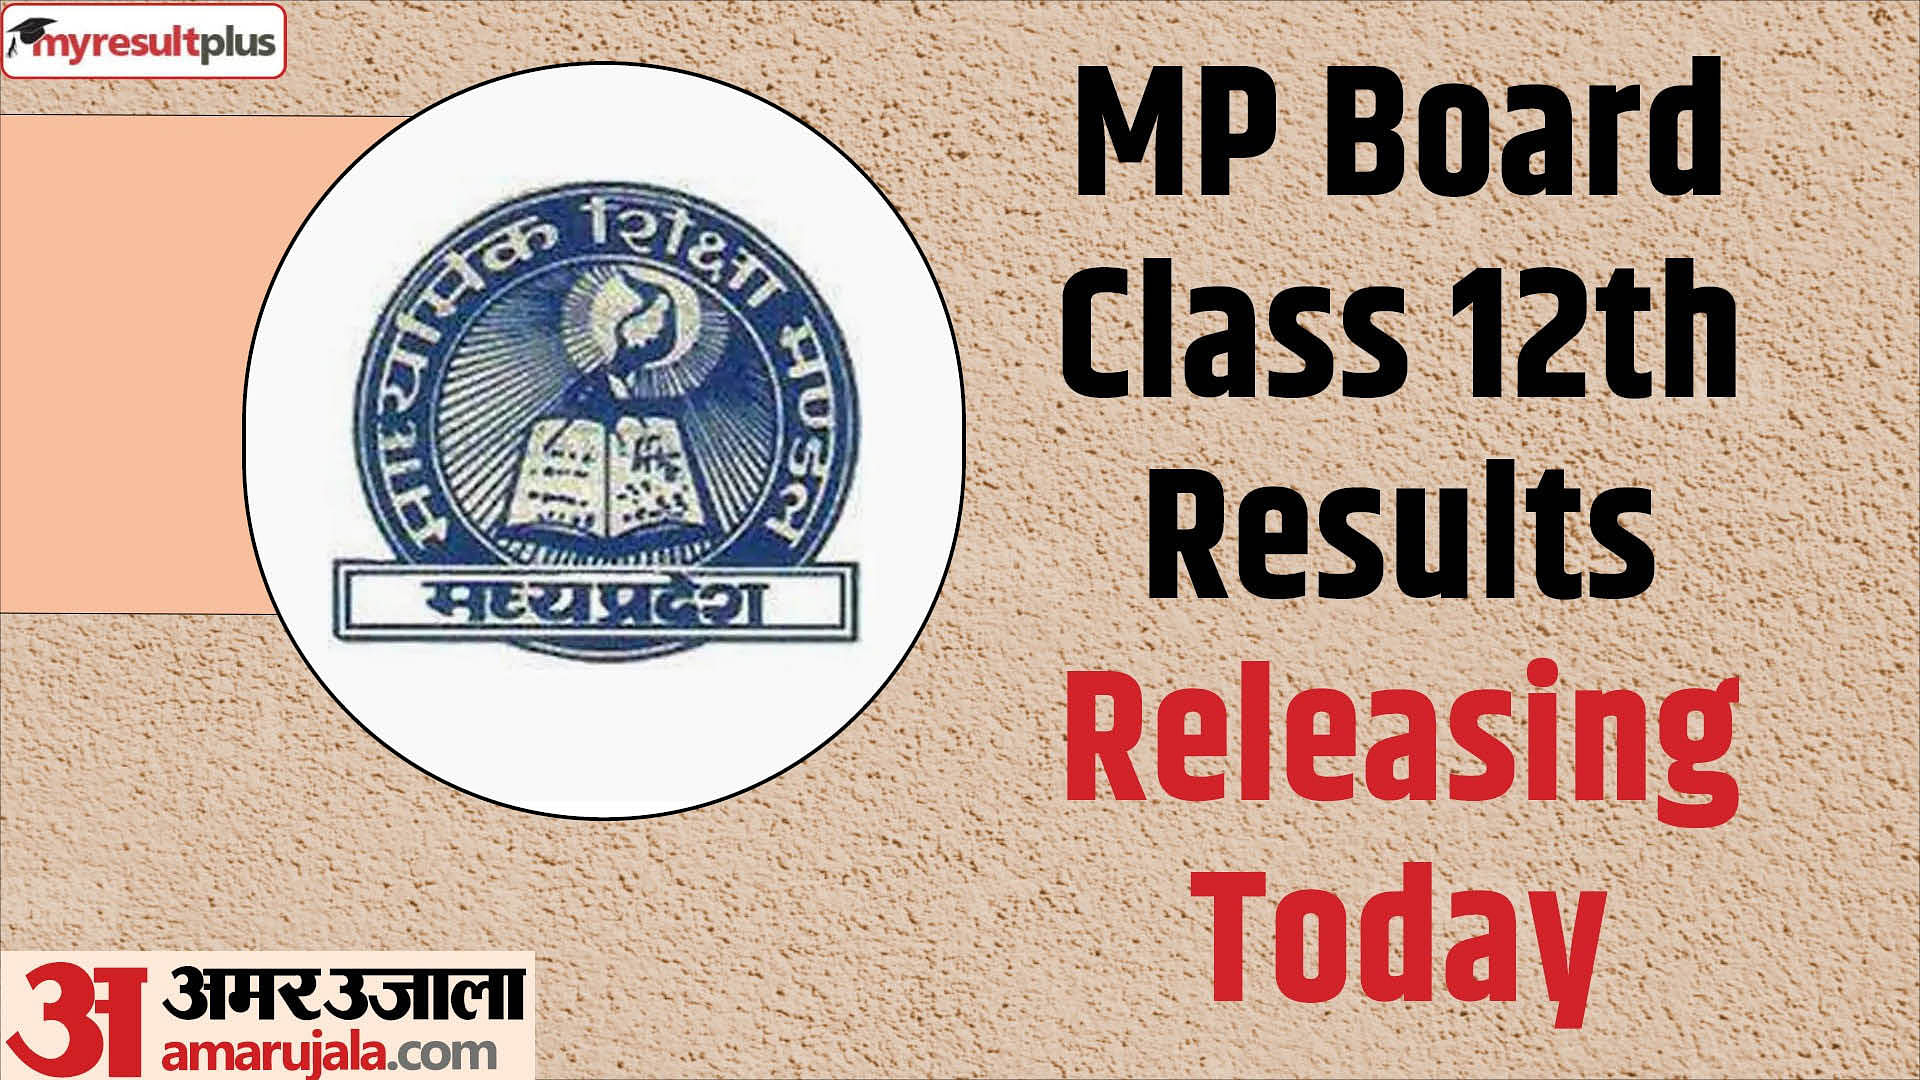 MP Board Class 12th Results to be declared today, Register here to get the scorecard directly on your phone